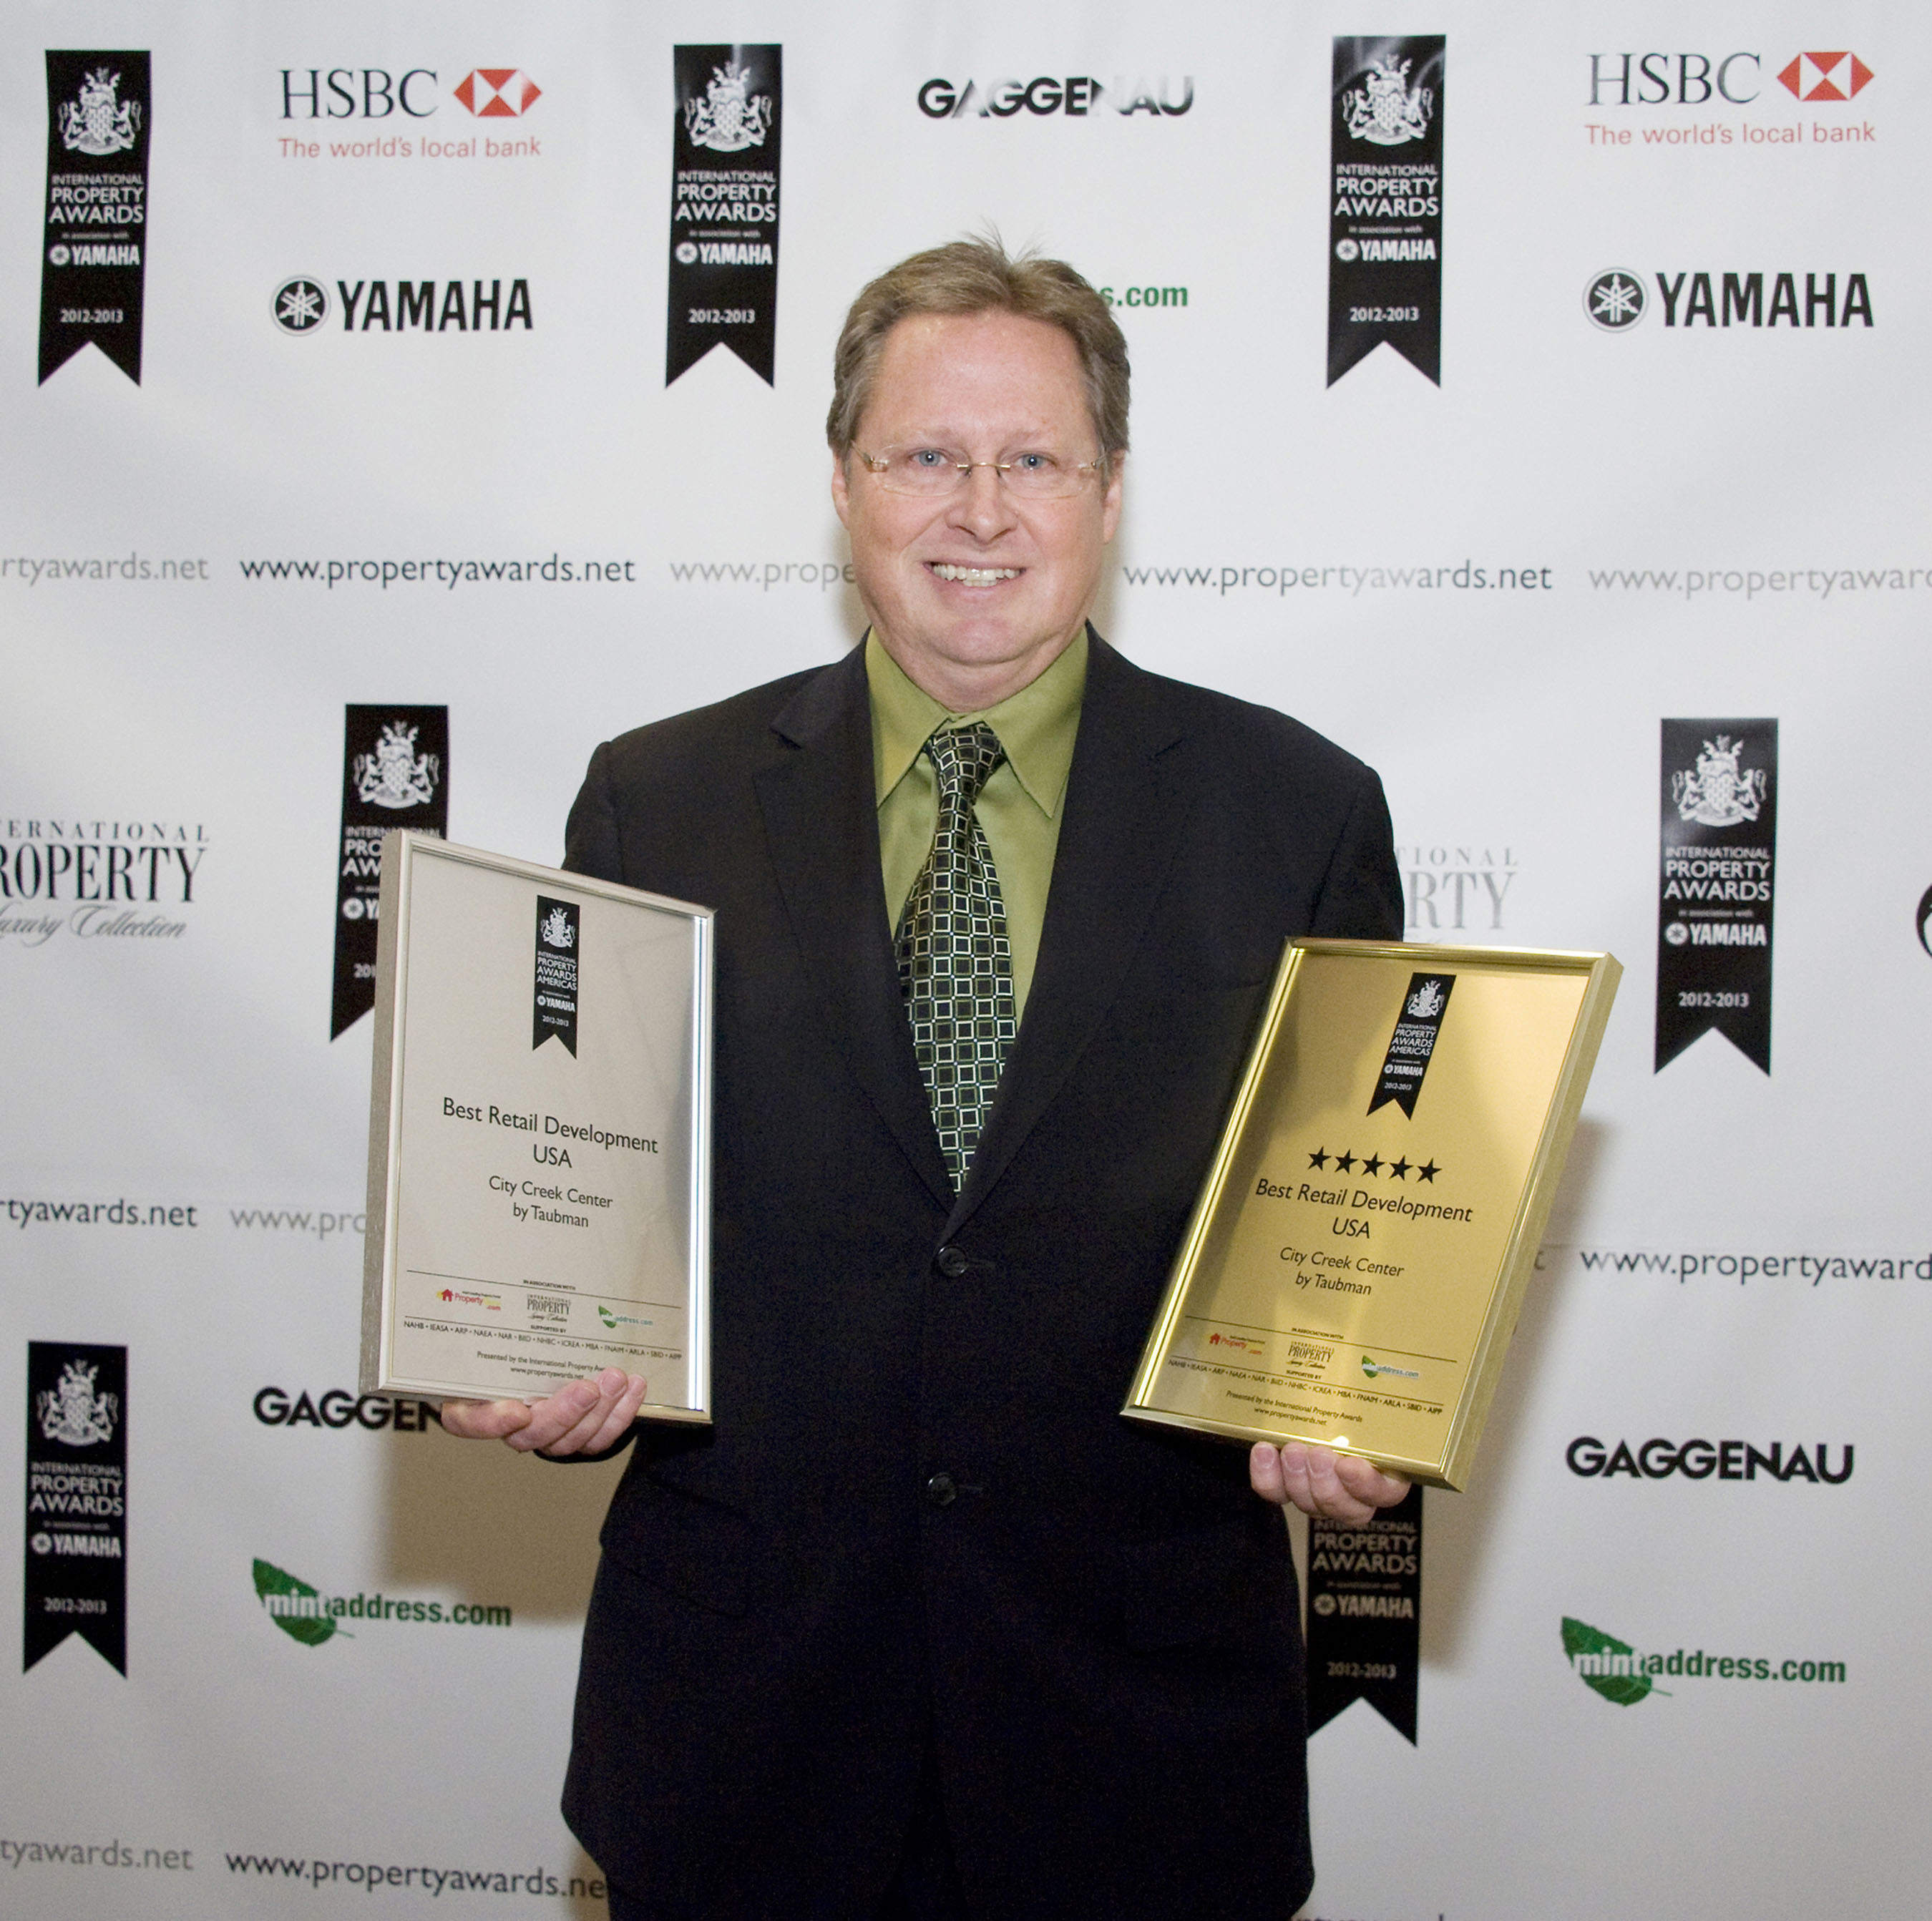 Ron Loch, Taubman Vice President Planning and Design, accepts the International Property Award for Best Retail Development, USA for City Creek Center in Salt Lake City. (PRNewsFoto/Taubman Centers) (PRNewsFoto/TAUBMAN CENTERS)